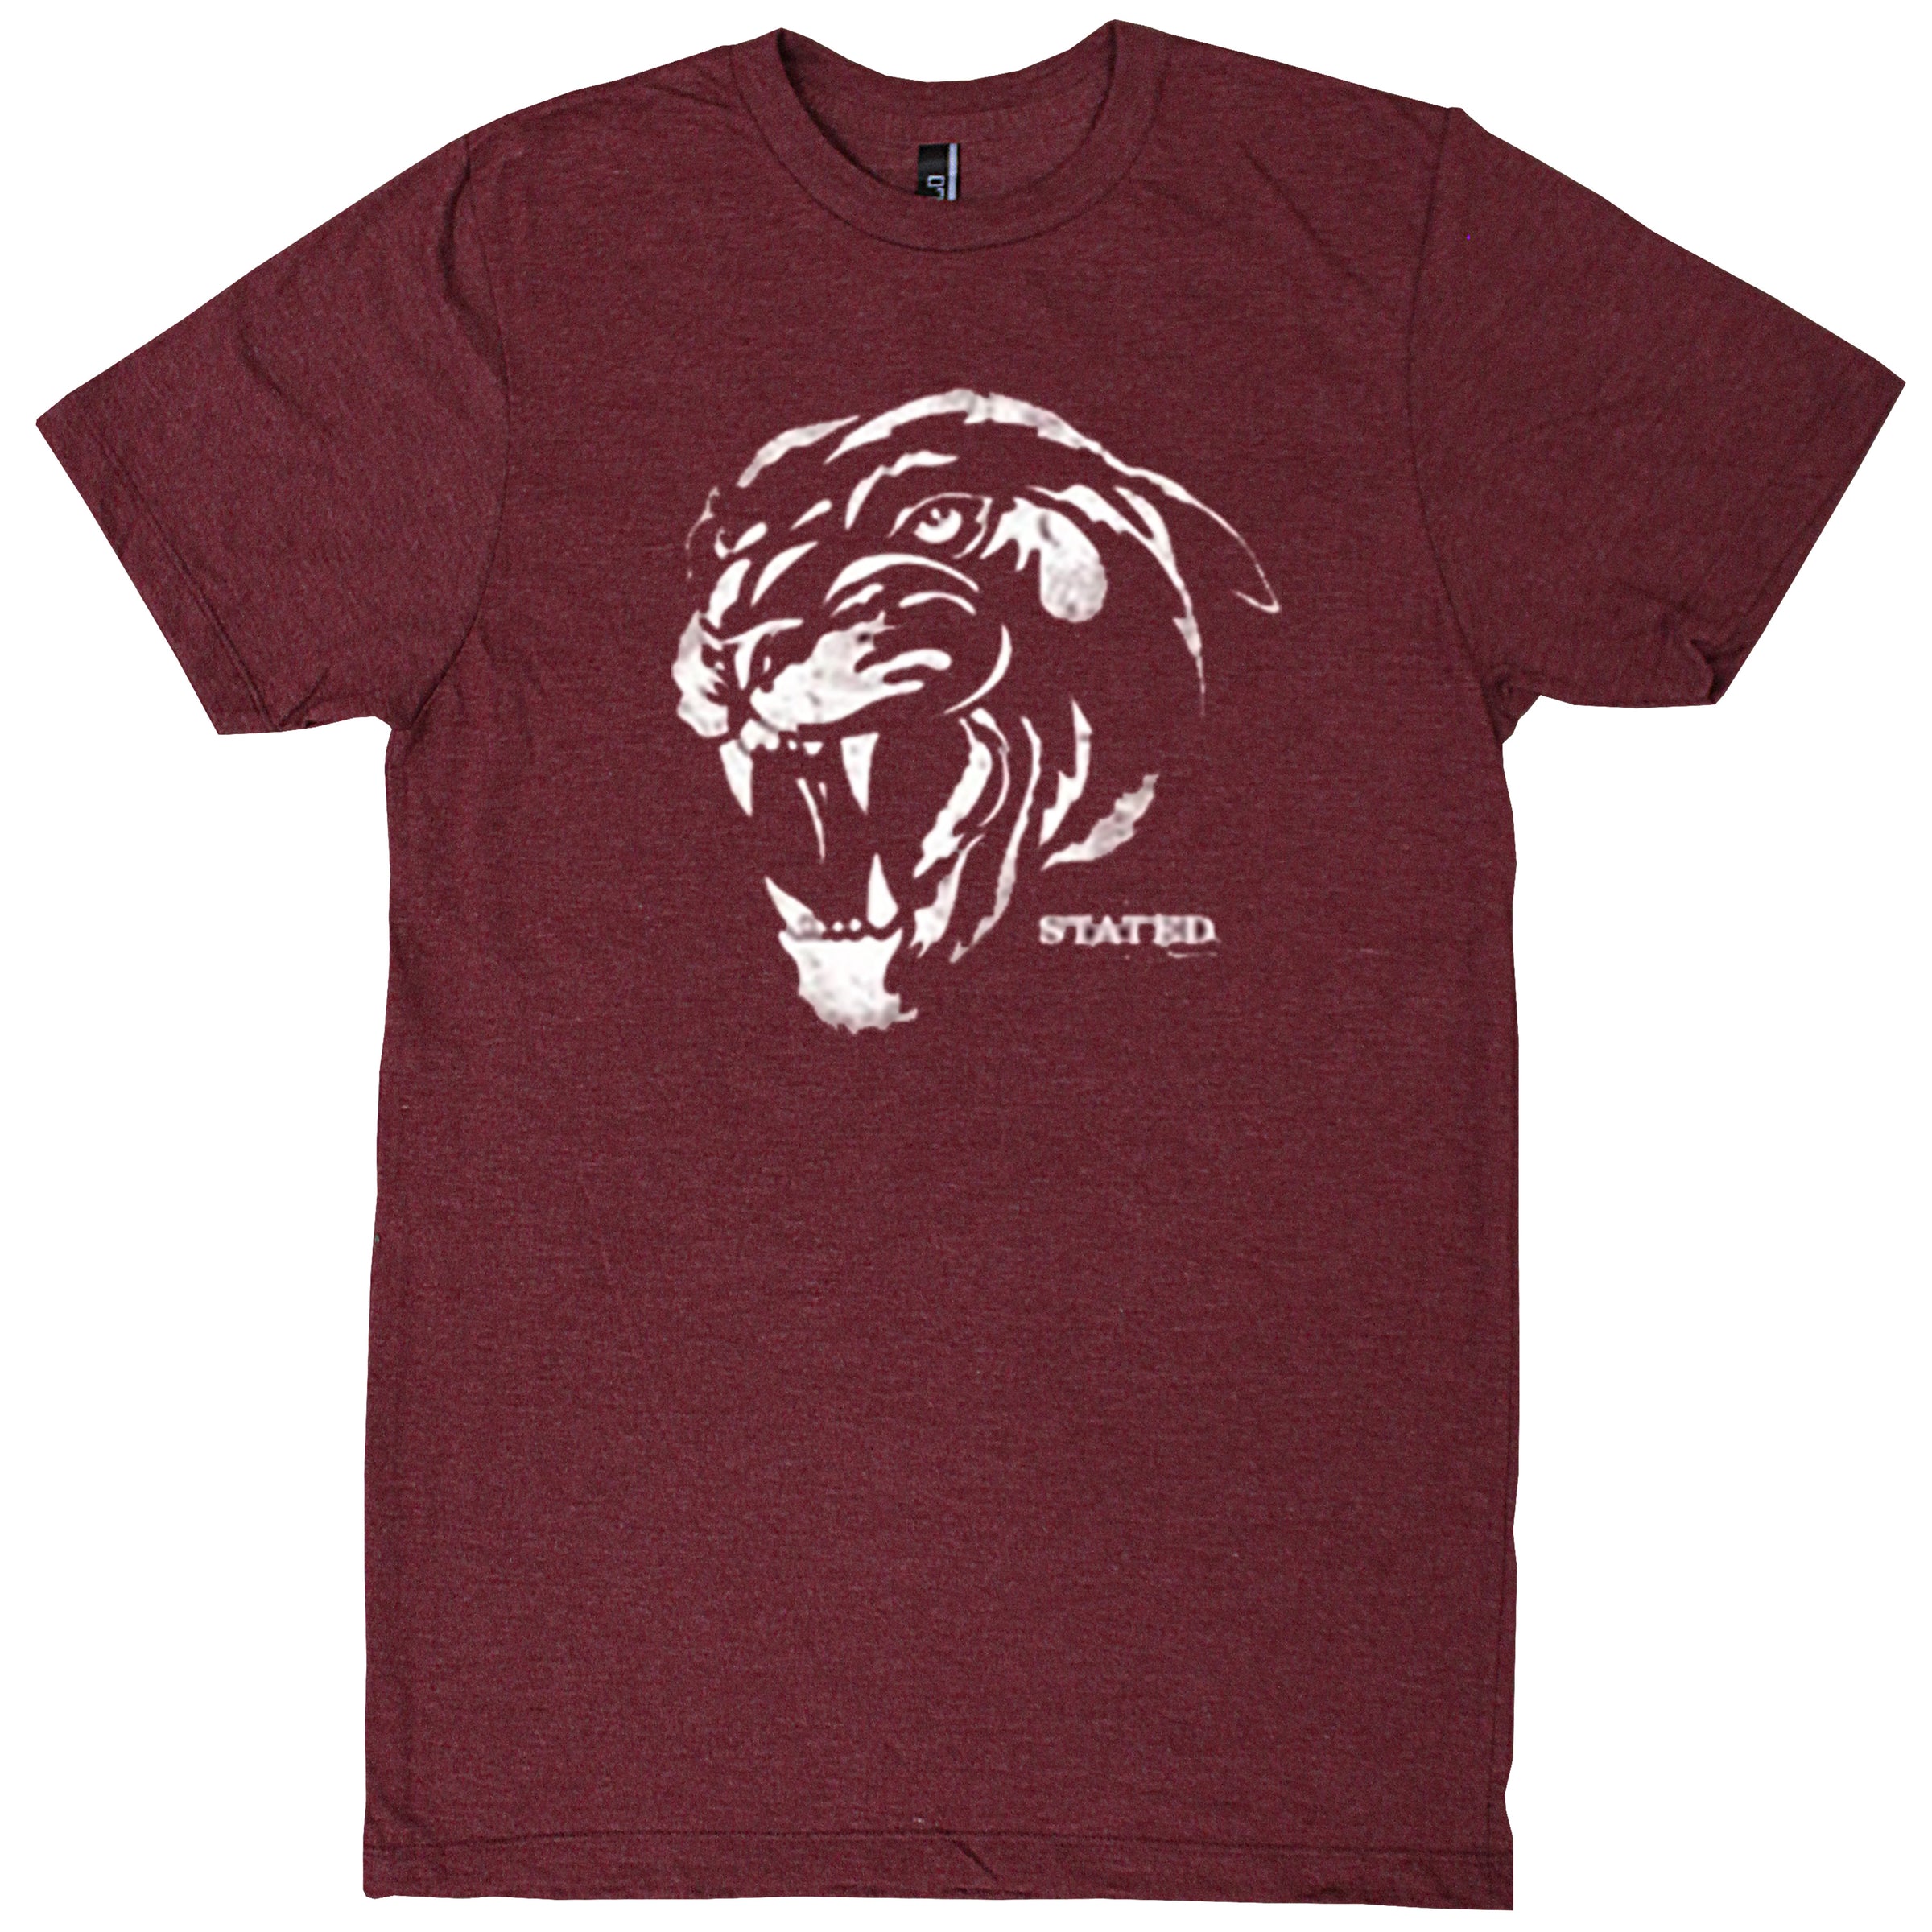 Panthers Blended Tee